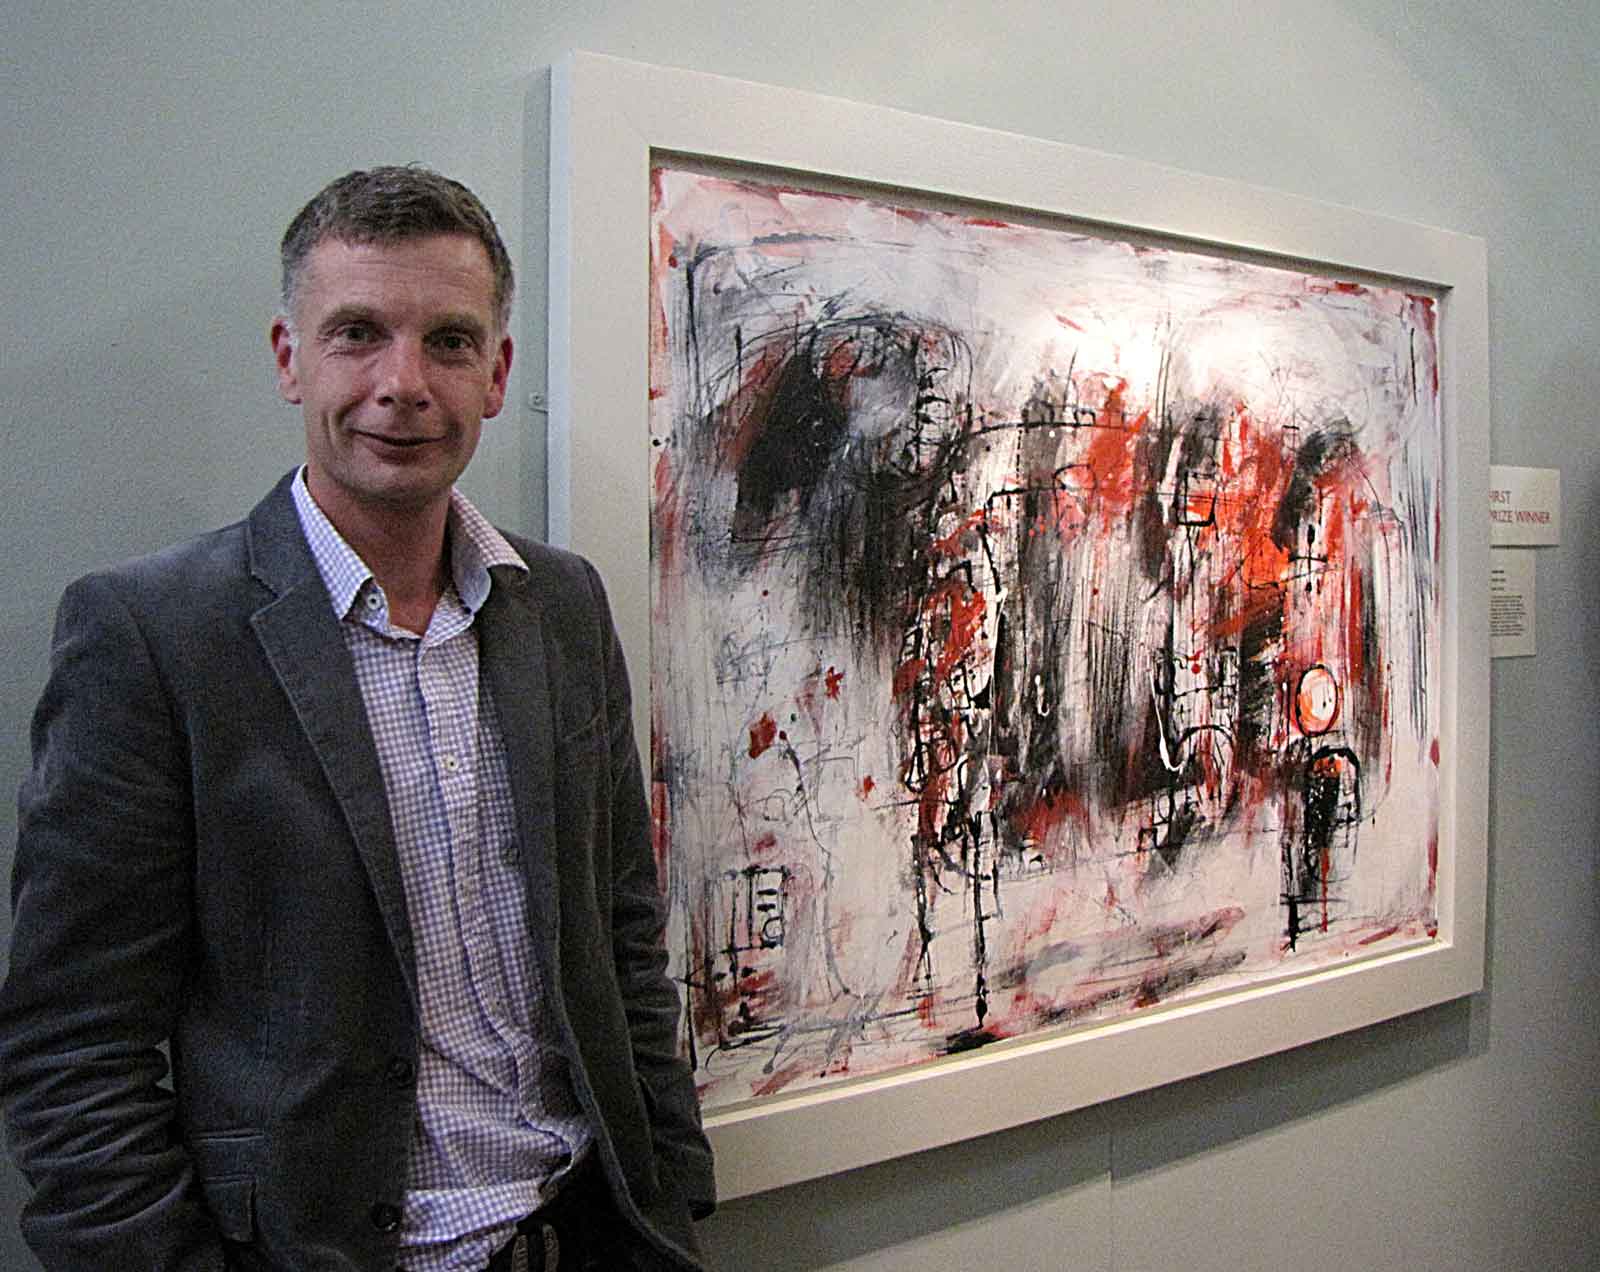 Adam King, first prize winner at the Harrogate Open in 2010, with his painting ‘The Scapegoat’ which is now in the Mercer collection